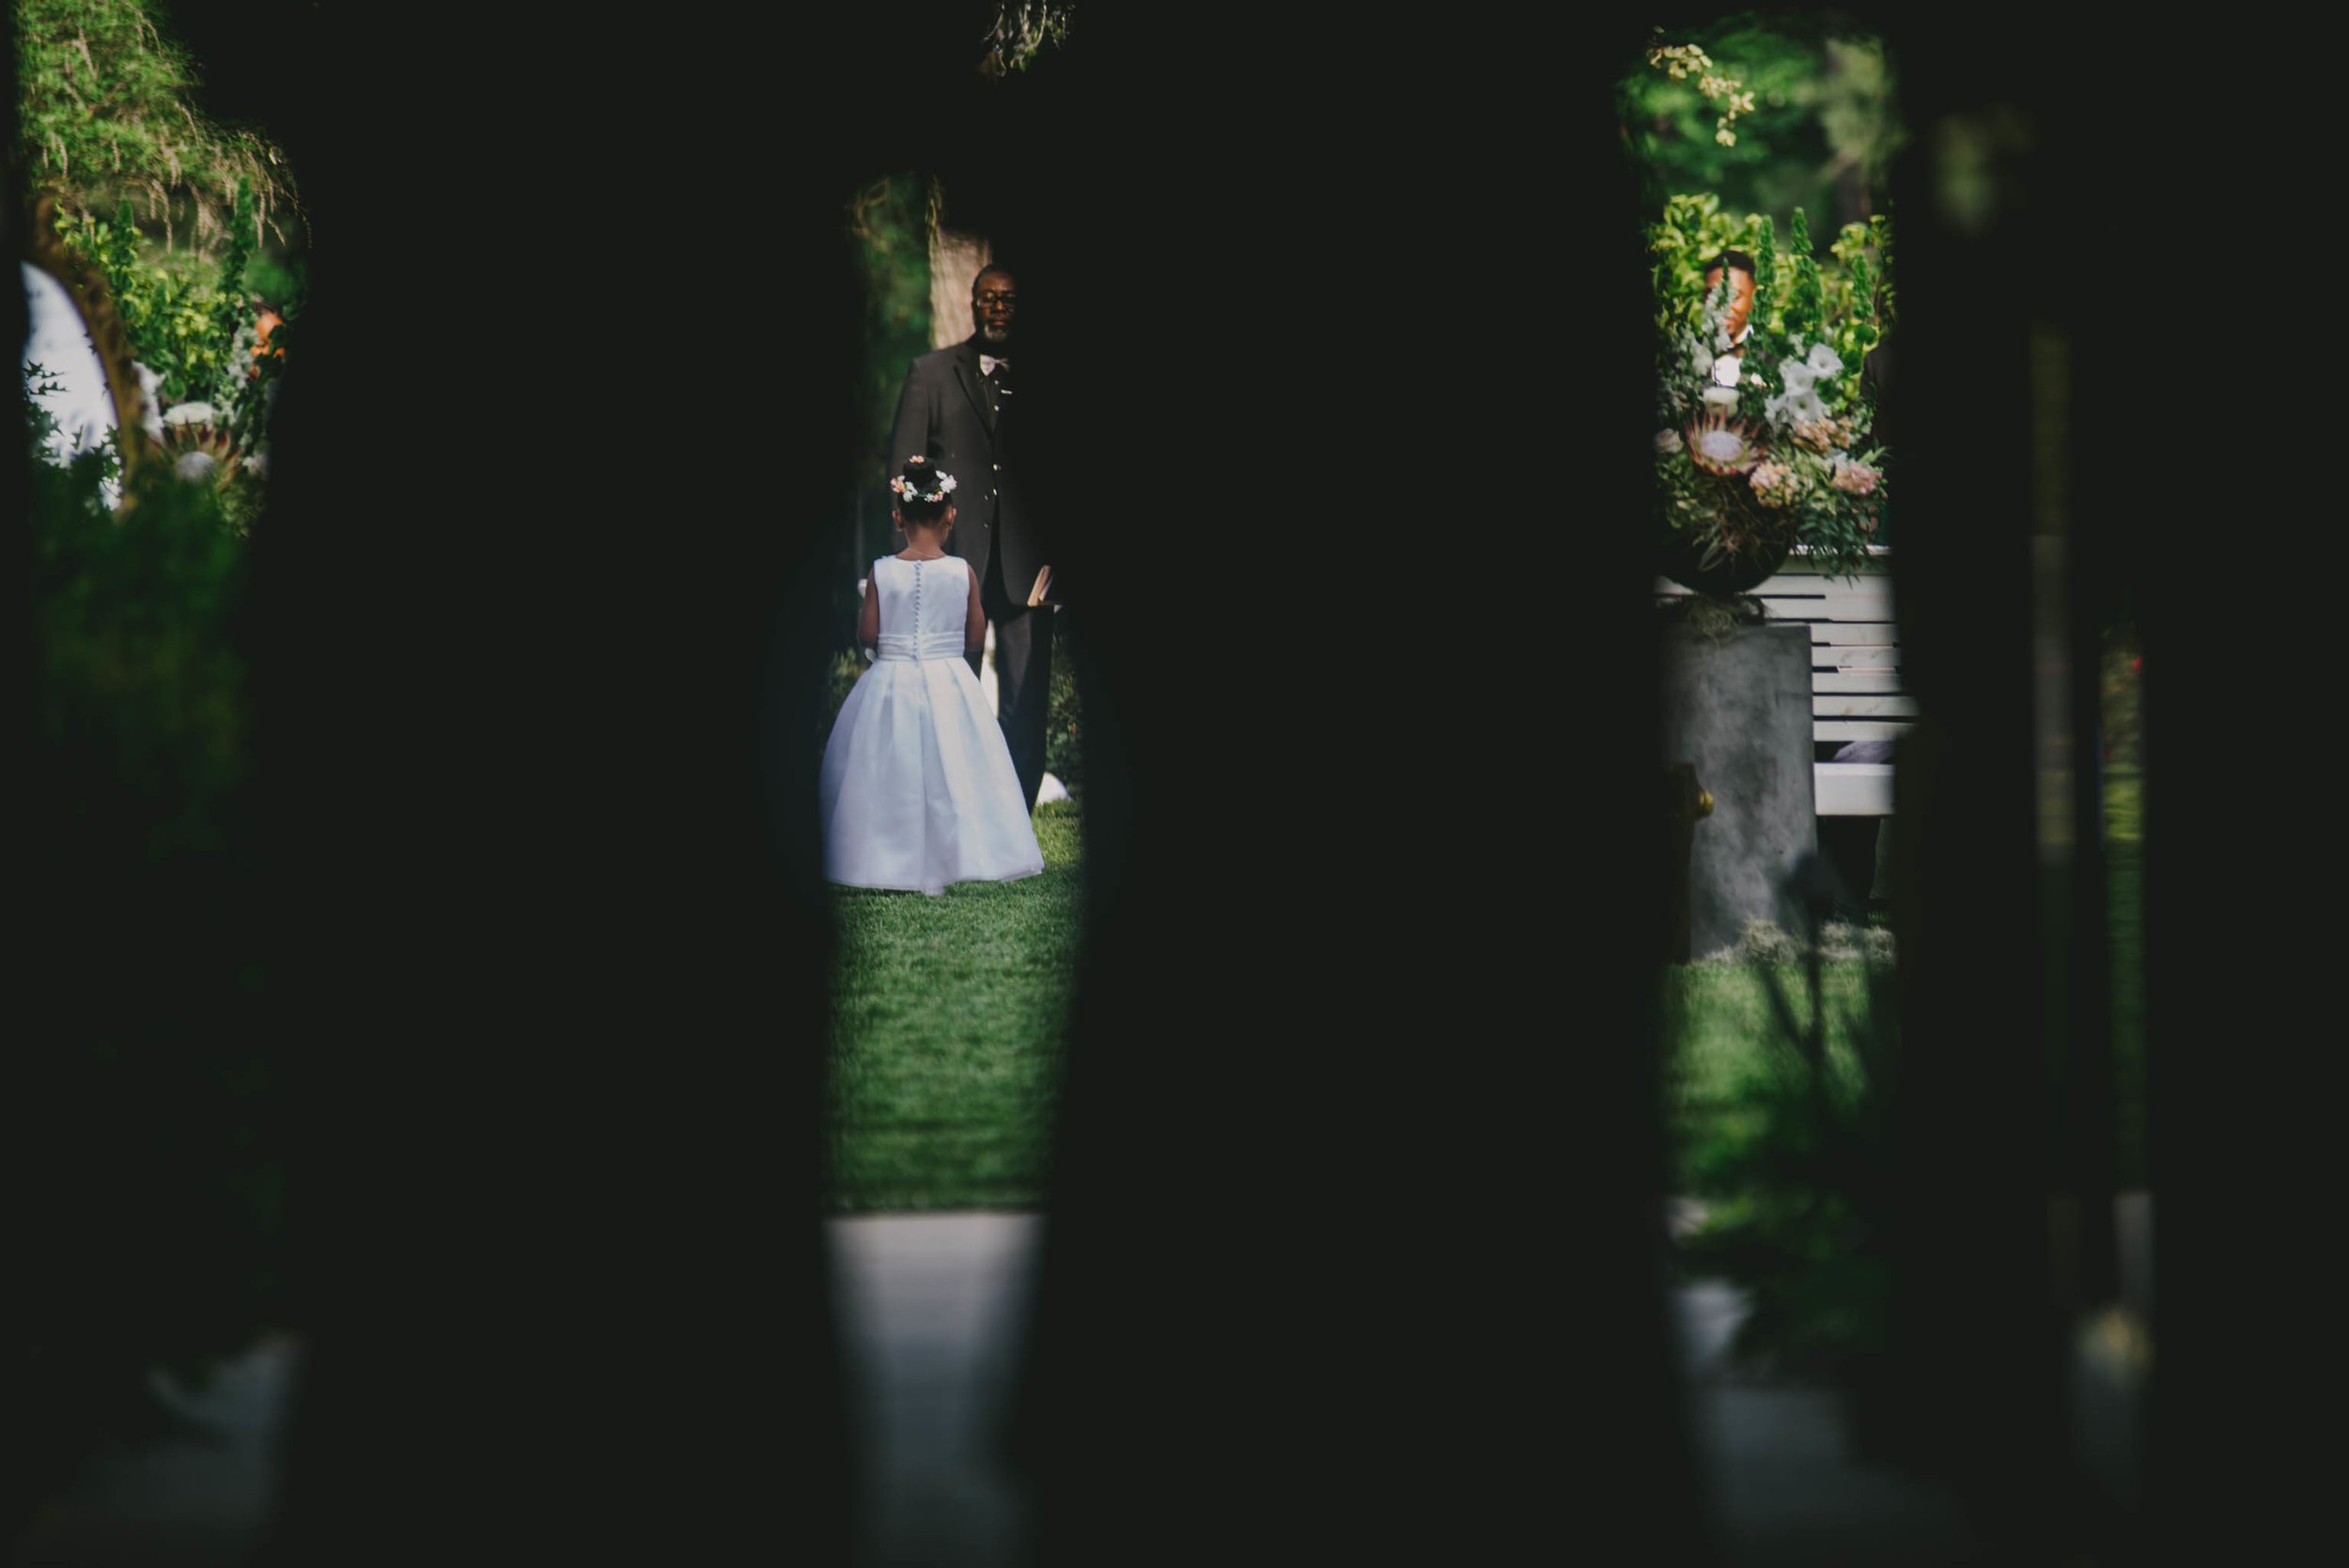 A flower girl as seen between the shadows of the two grandmothers during the processional of the wedding